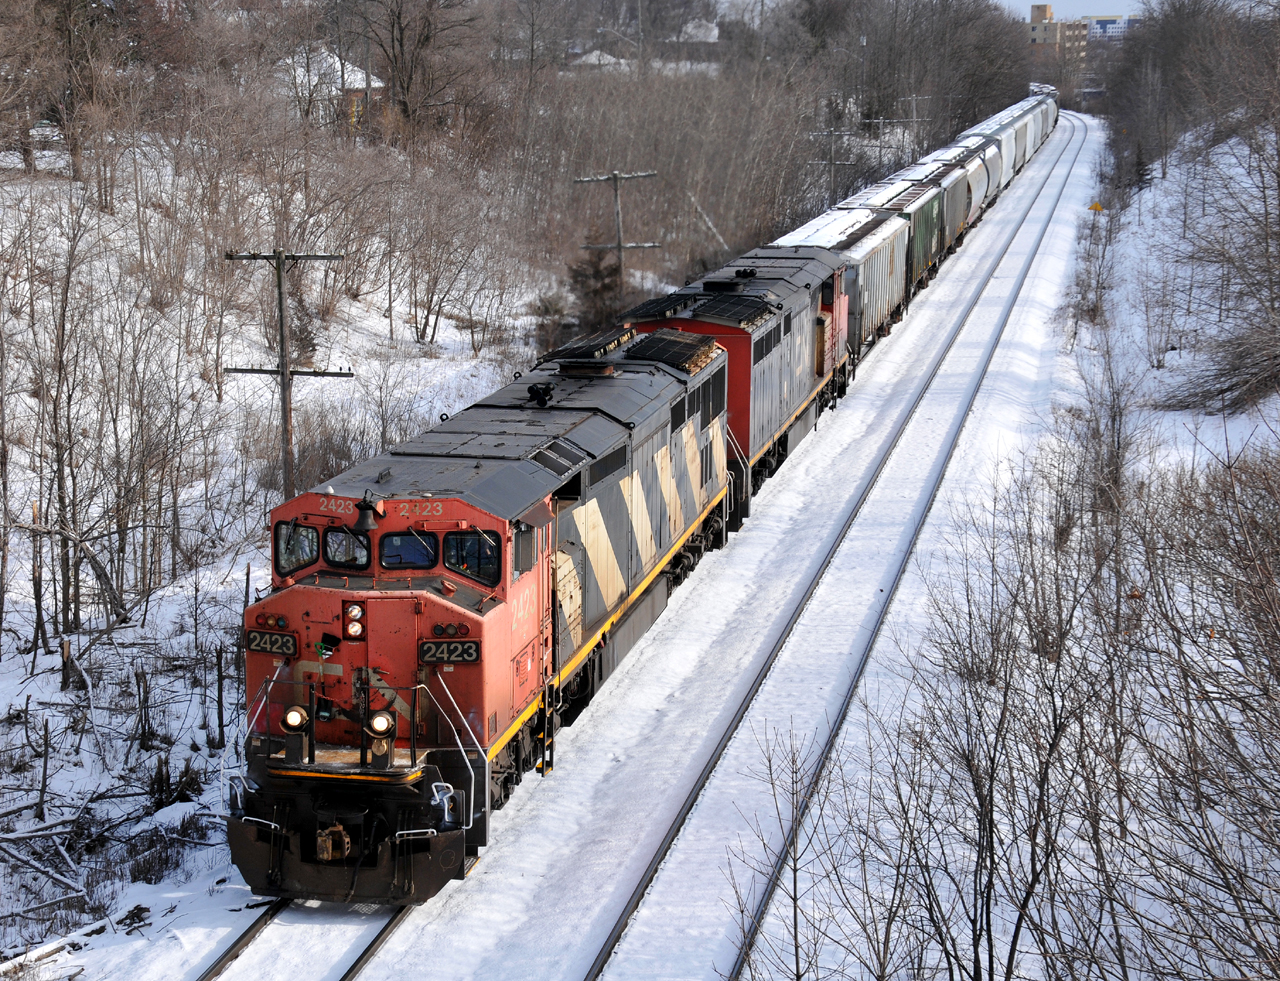 A43531 05 thunders out of Brantford with CN 2423 and CN 2438 at the helm. These two aging C40-8M's were putting up quite the fight with their 155 car train